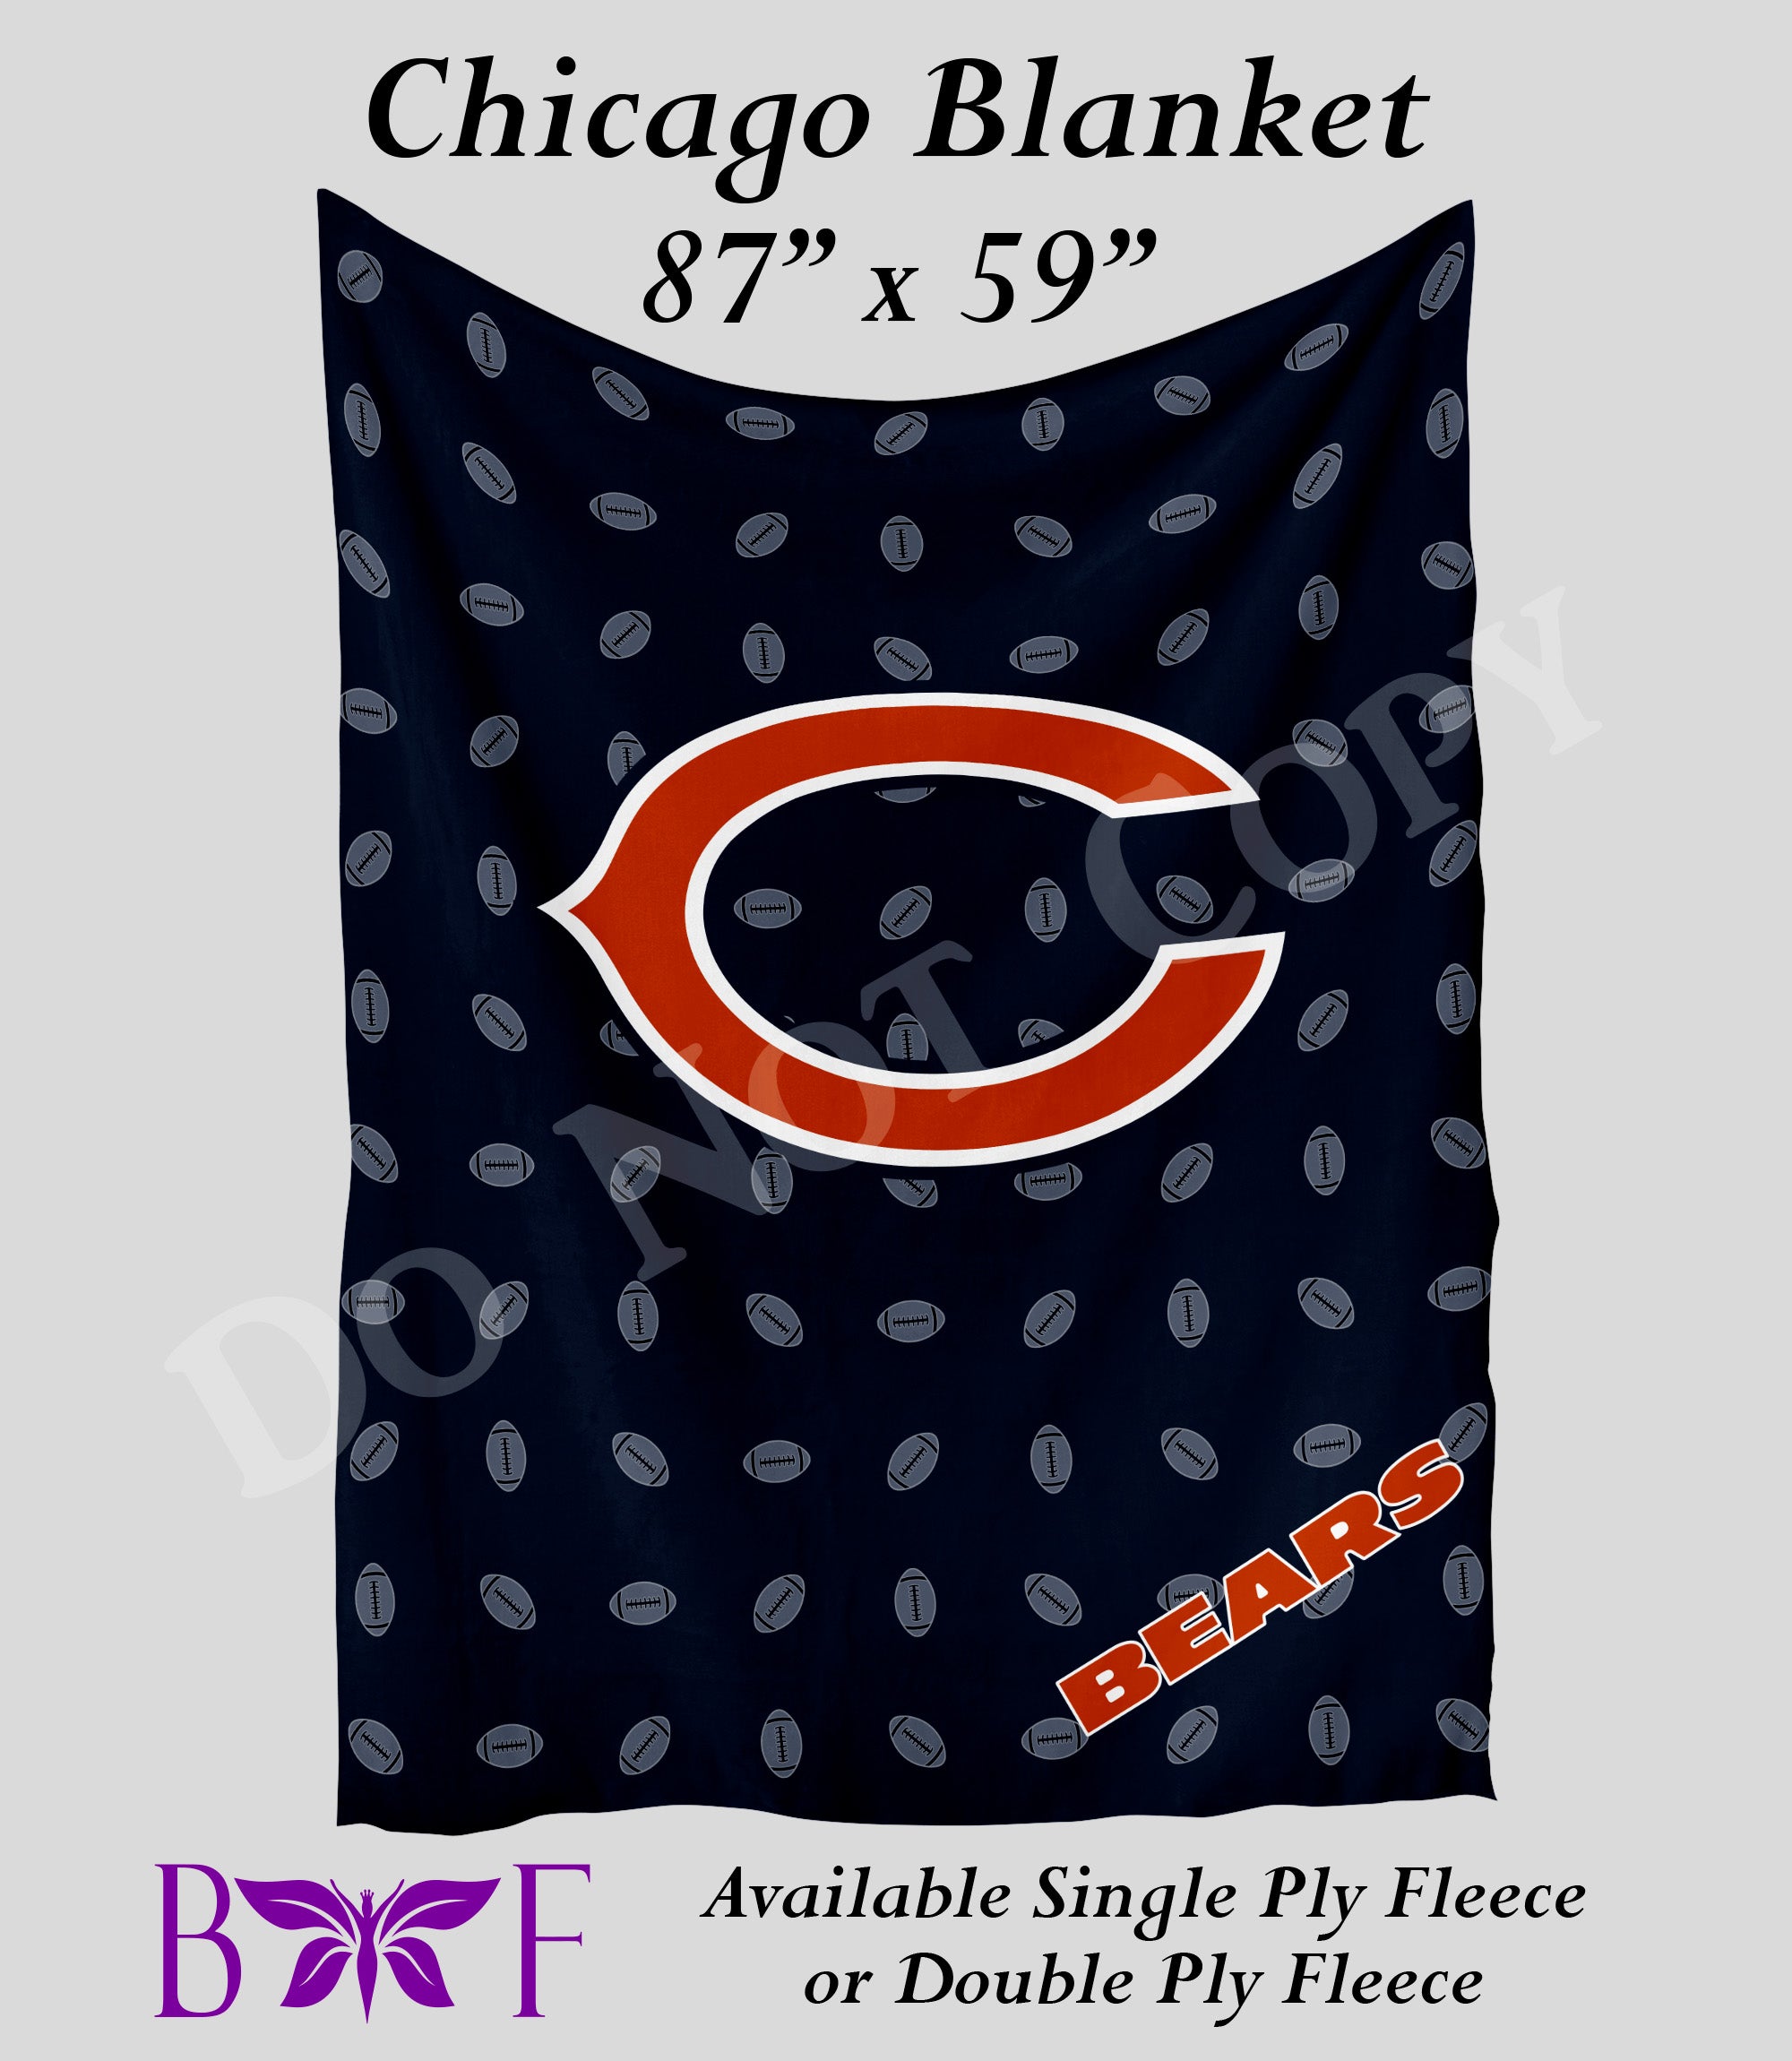 Chicago 59"x87" soft blanket available without sherpa fleece